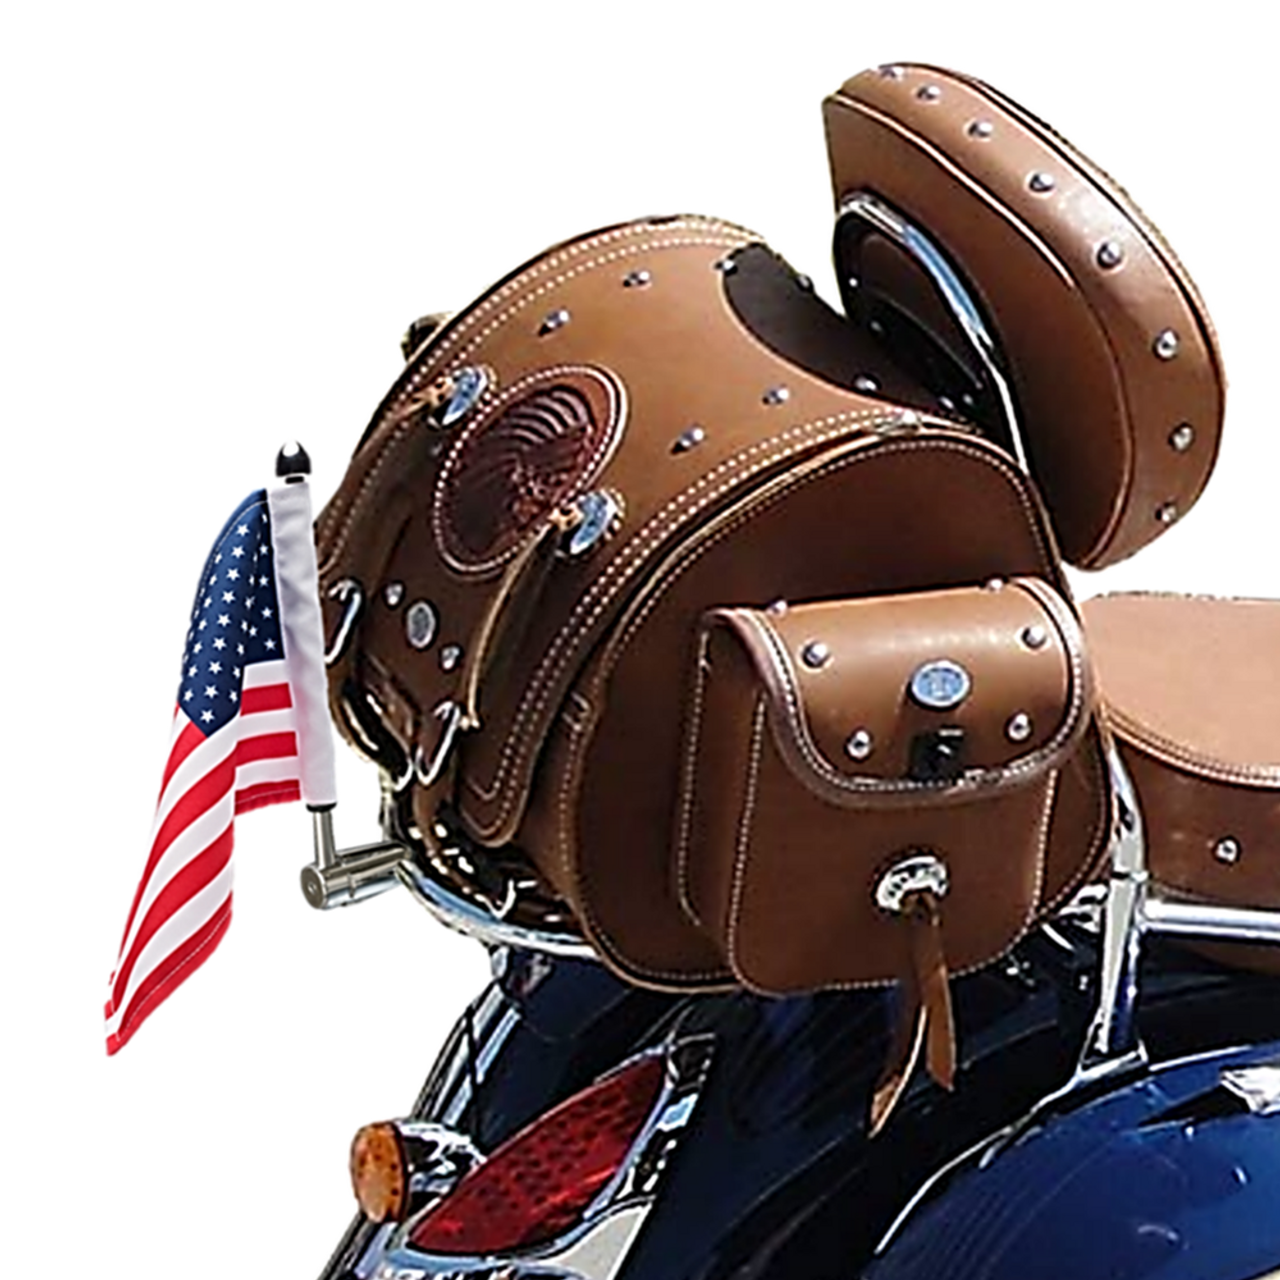 .765" Fixed, extended horizontal mount with 9" pole, standard cone topper and
6"x9" USA flag on quick detach Indian Chieftain sissy bar luggage rack (rack not included)
